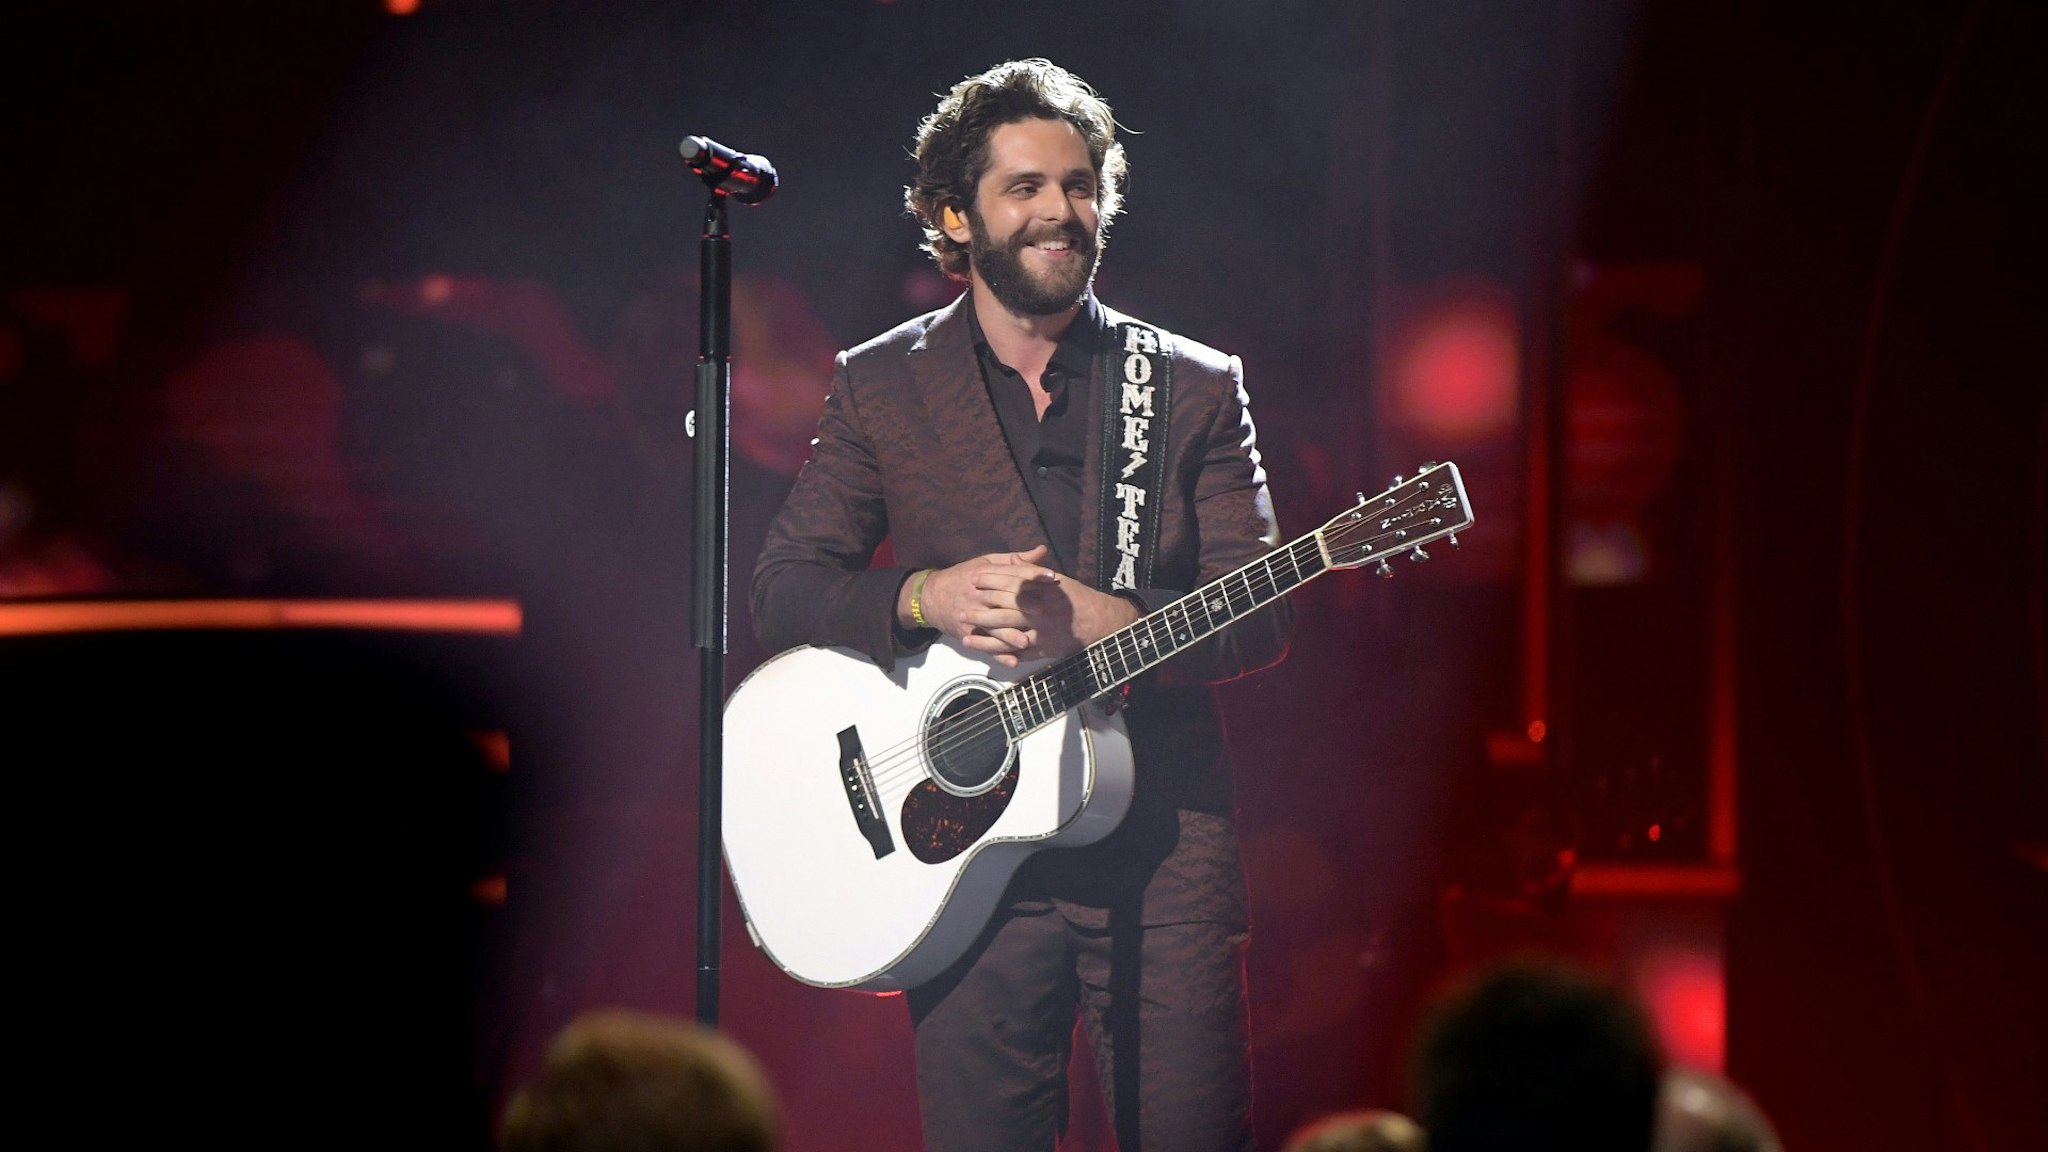 Honoree Thomas Rhett performs onstage during the 2019 CMT Artist of the Year at Schermerhorn Symphony Center on October 16, 2019 in Nashville, Tennessee.